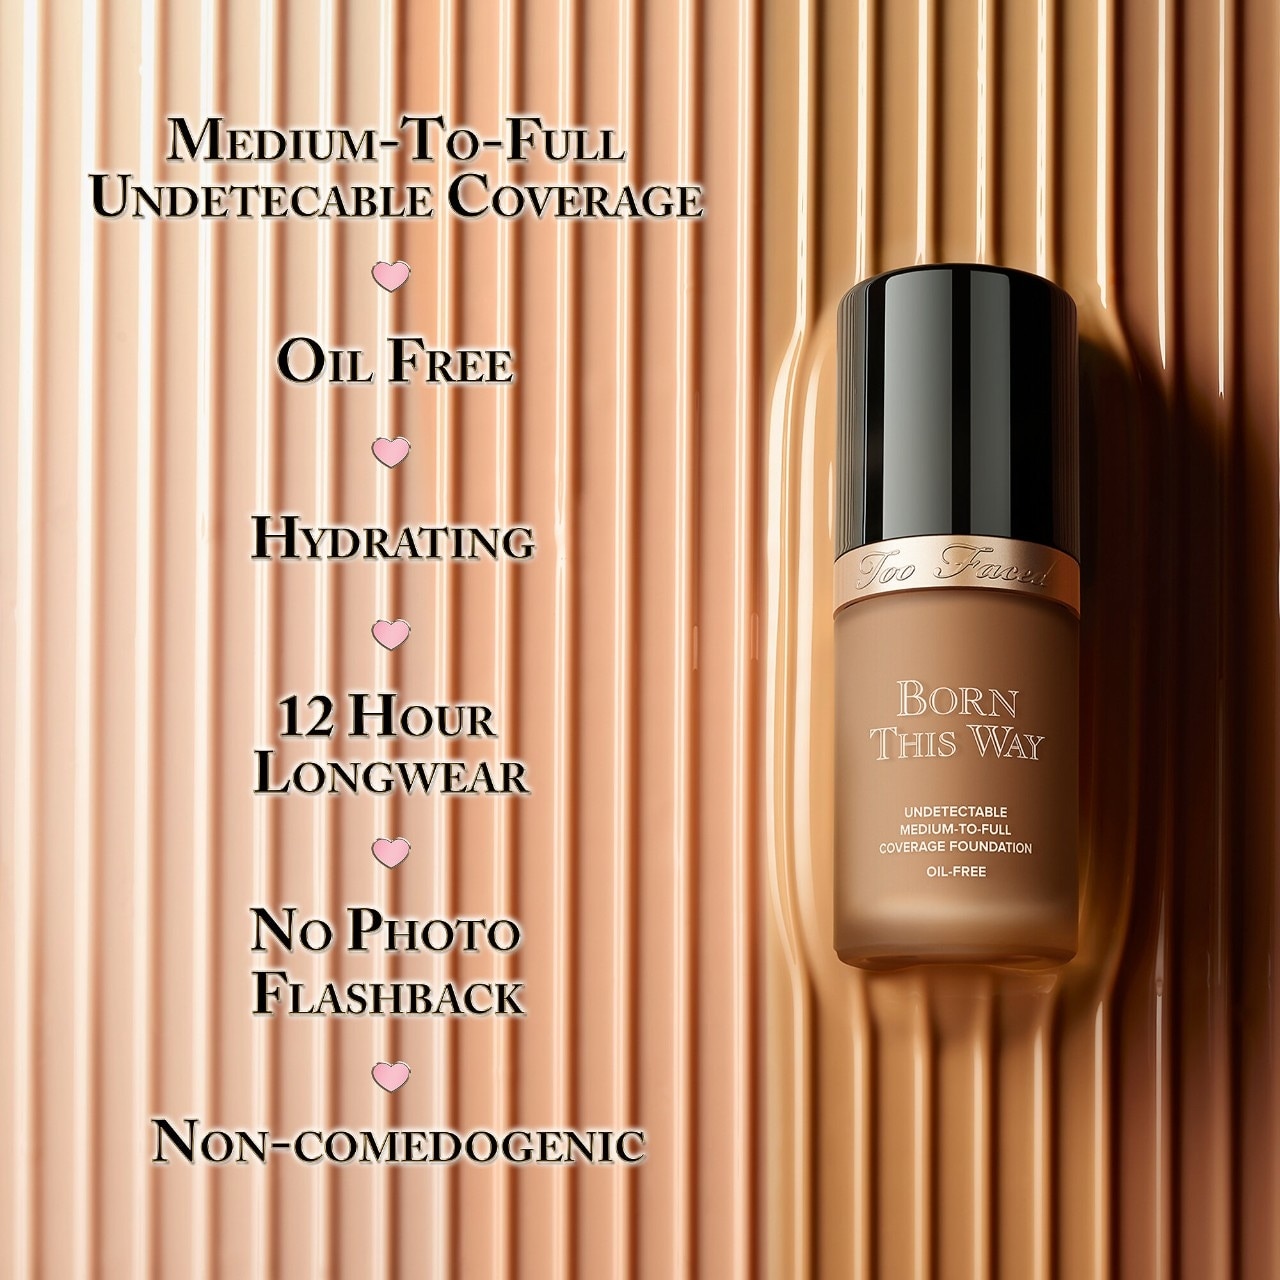 Too Faced Born This Way Undetectable Medium To Full Coverage Foundation (30ml) Too Faced